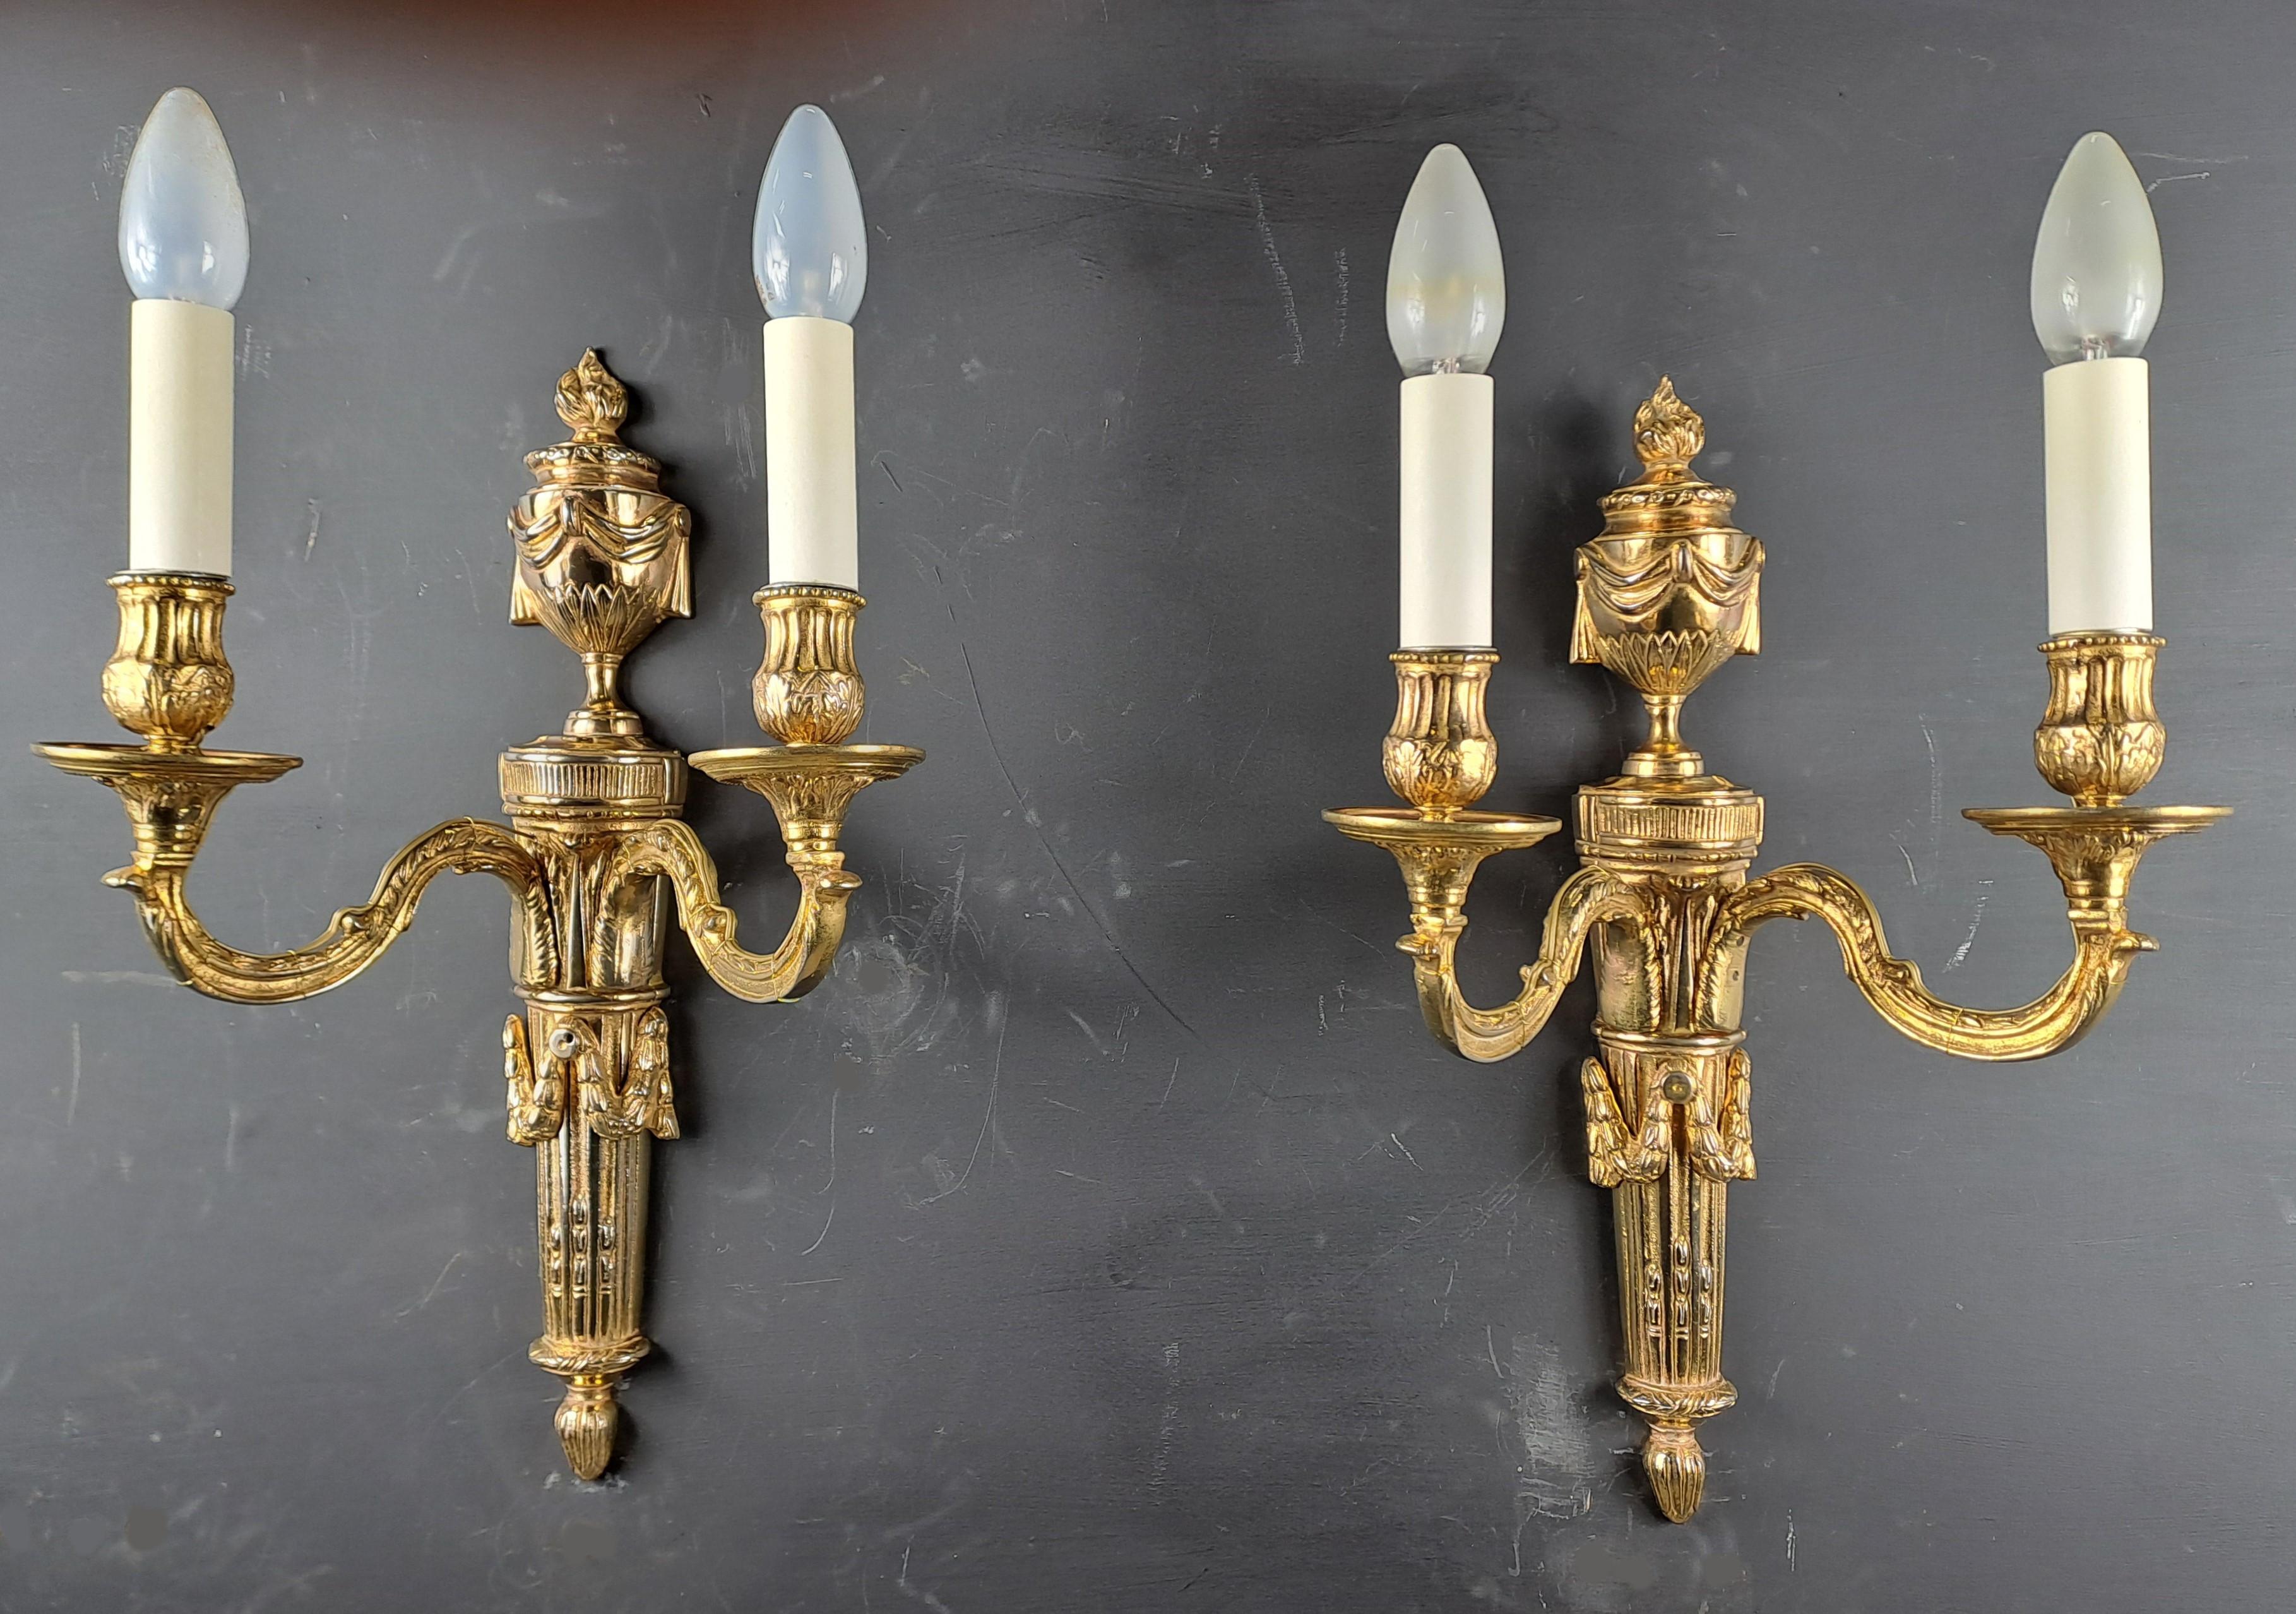 Pair of Louis XVI Style Sconces in Gilt Bronze with two arms of light.

Beautiful classic decor including a fire pot and garlands.

Work from the end of the 19th century.

Very good condition,  electrification completely redone by our workshop. EU